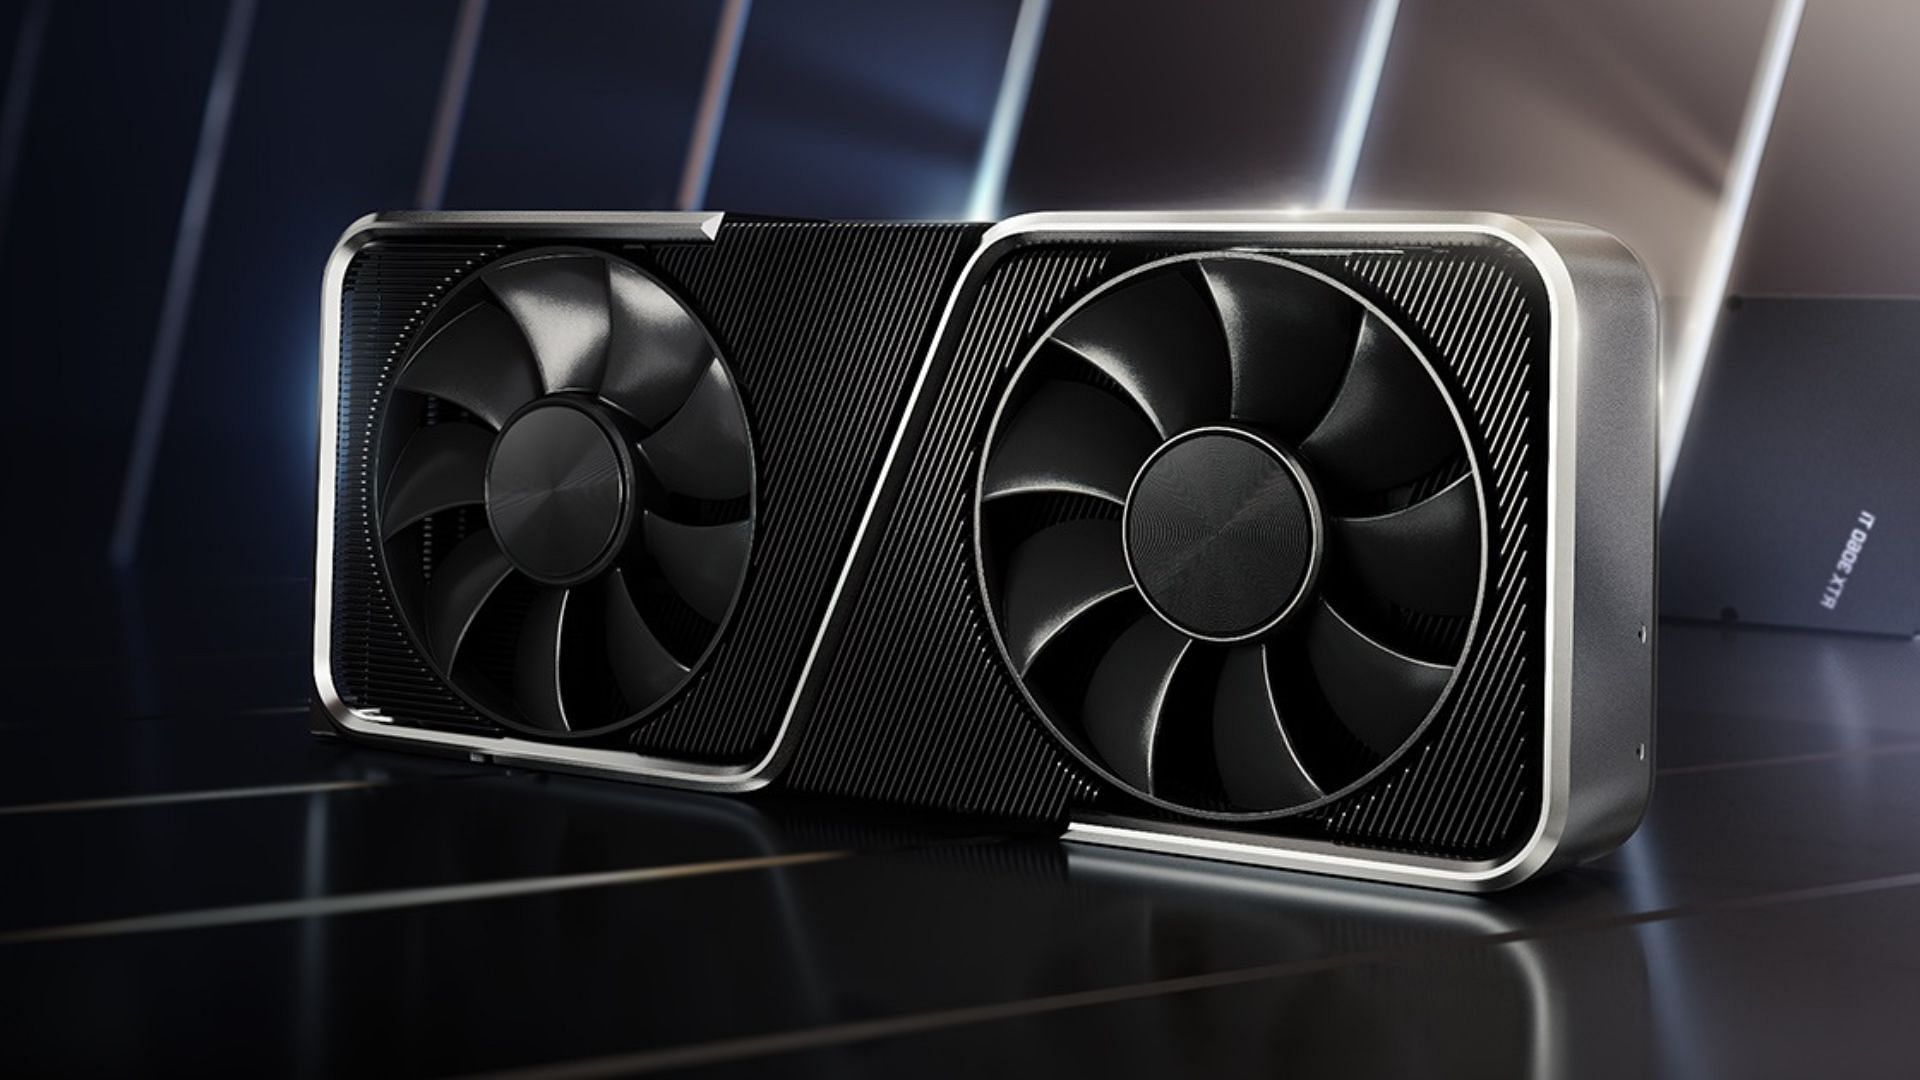 The RTX 3060 12 GB is one of the most popular GPUs in the market (Image via Nvidia)